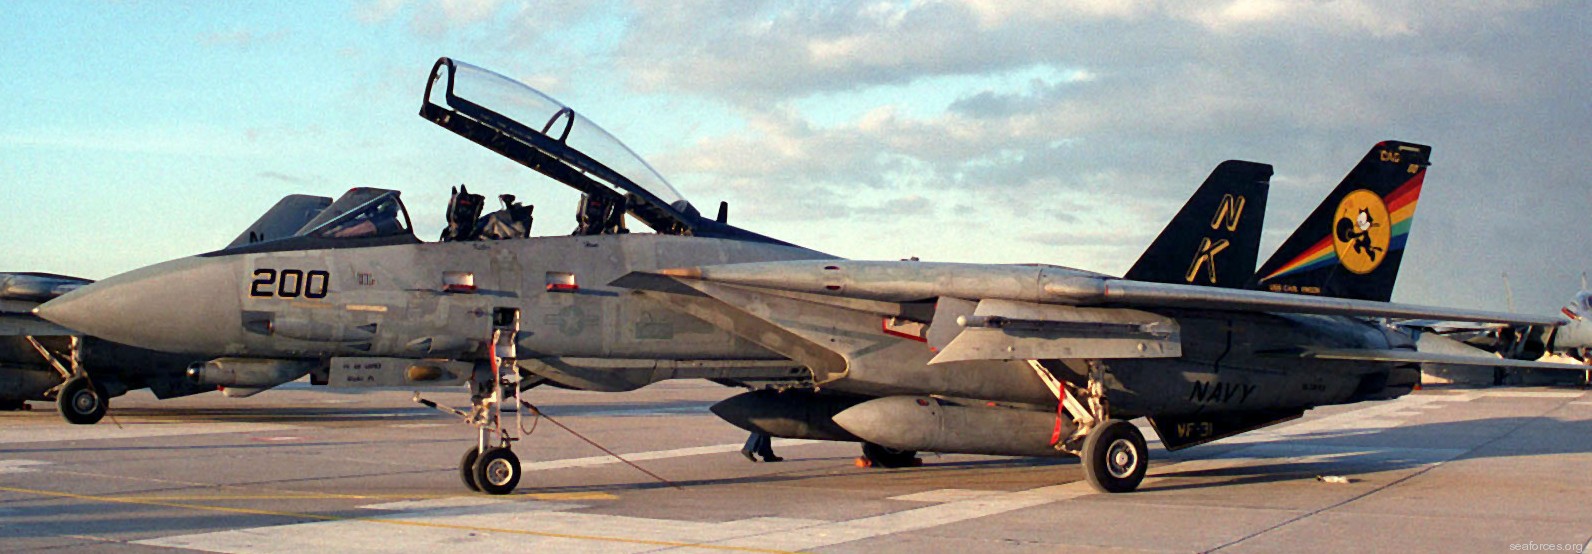 vf-31 tomcatters fighter squadron navy f-14d tomcat cvw-14 112